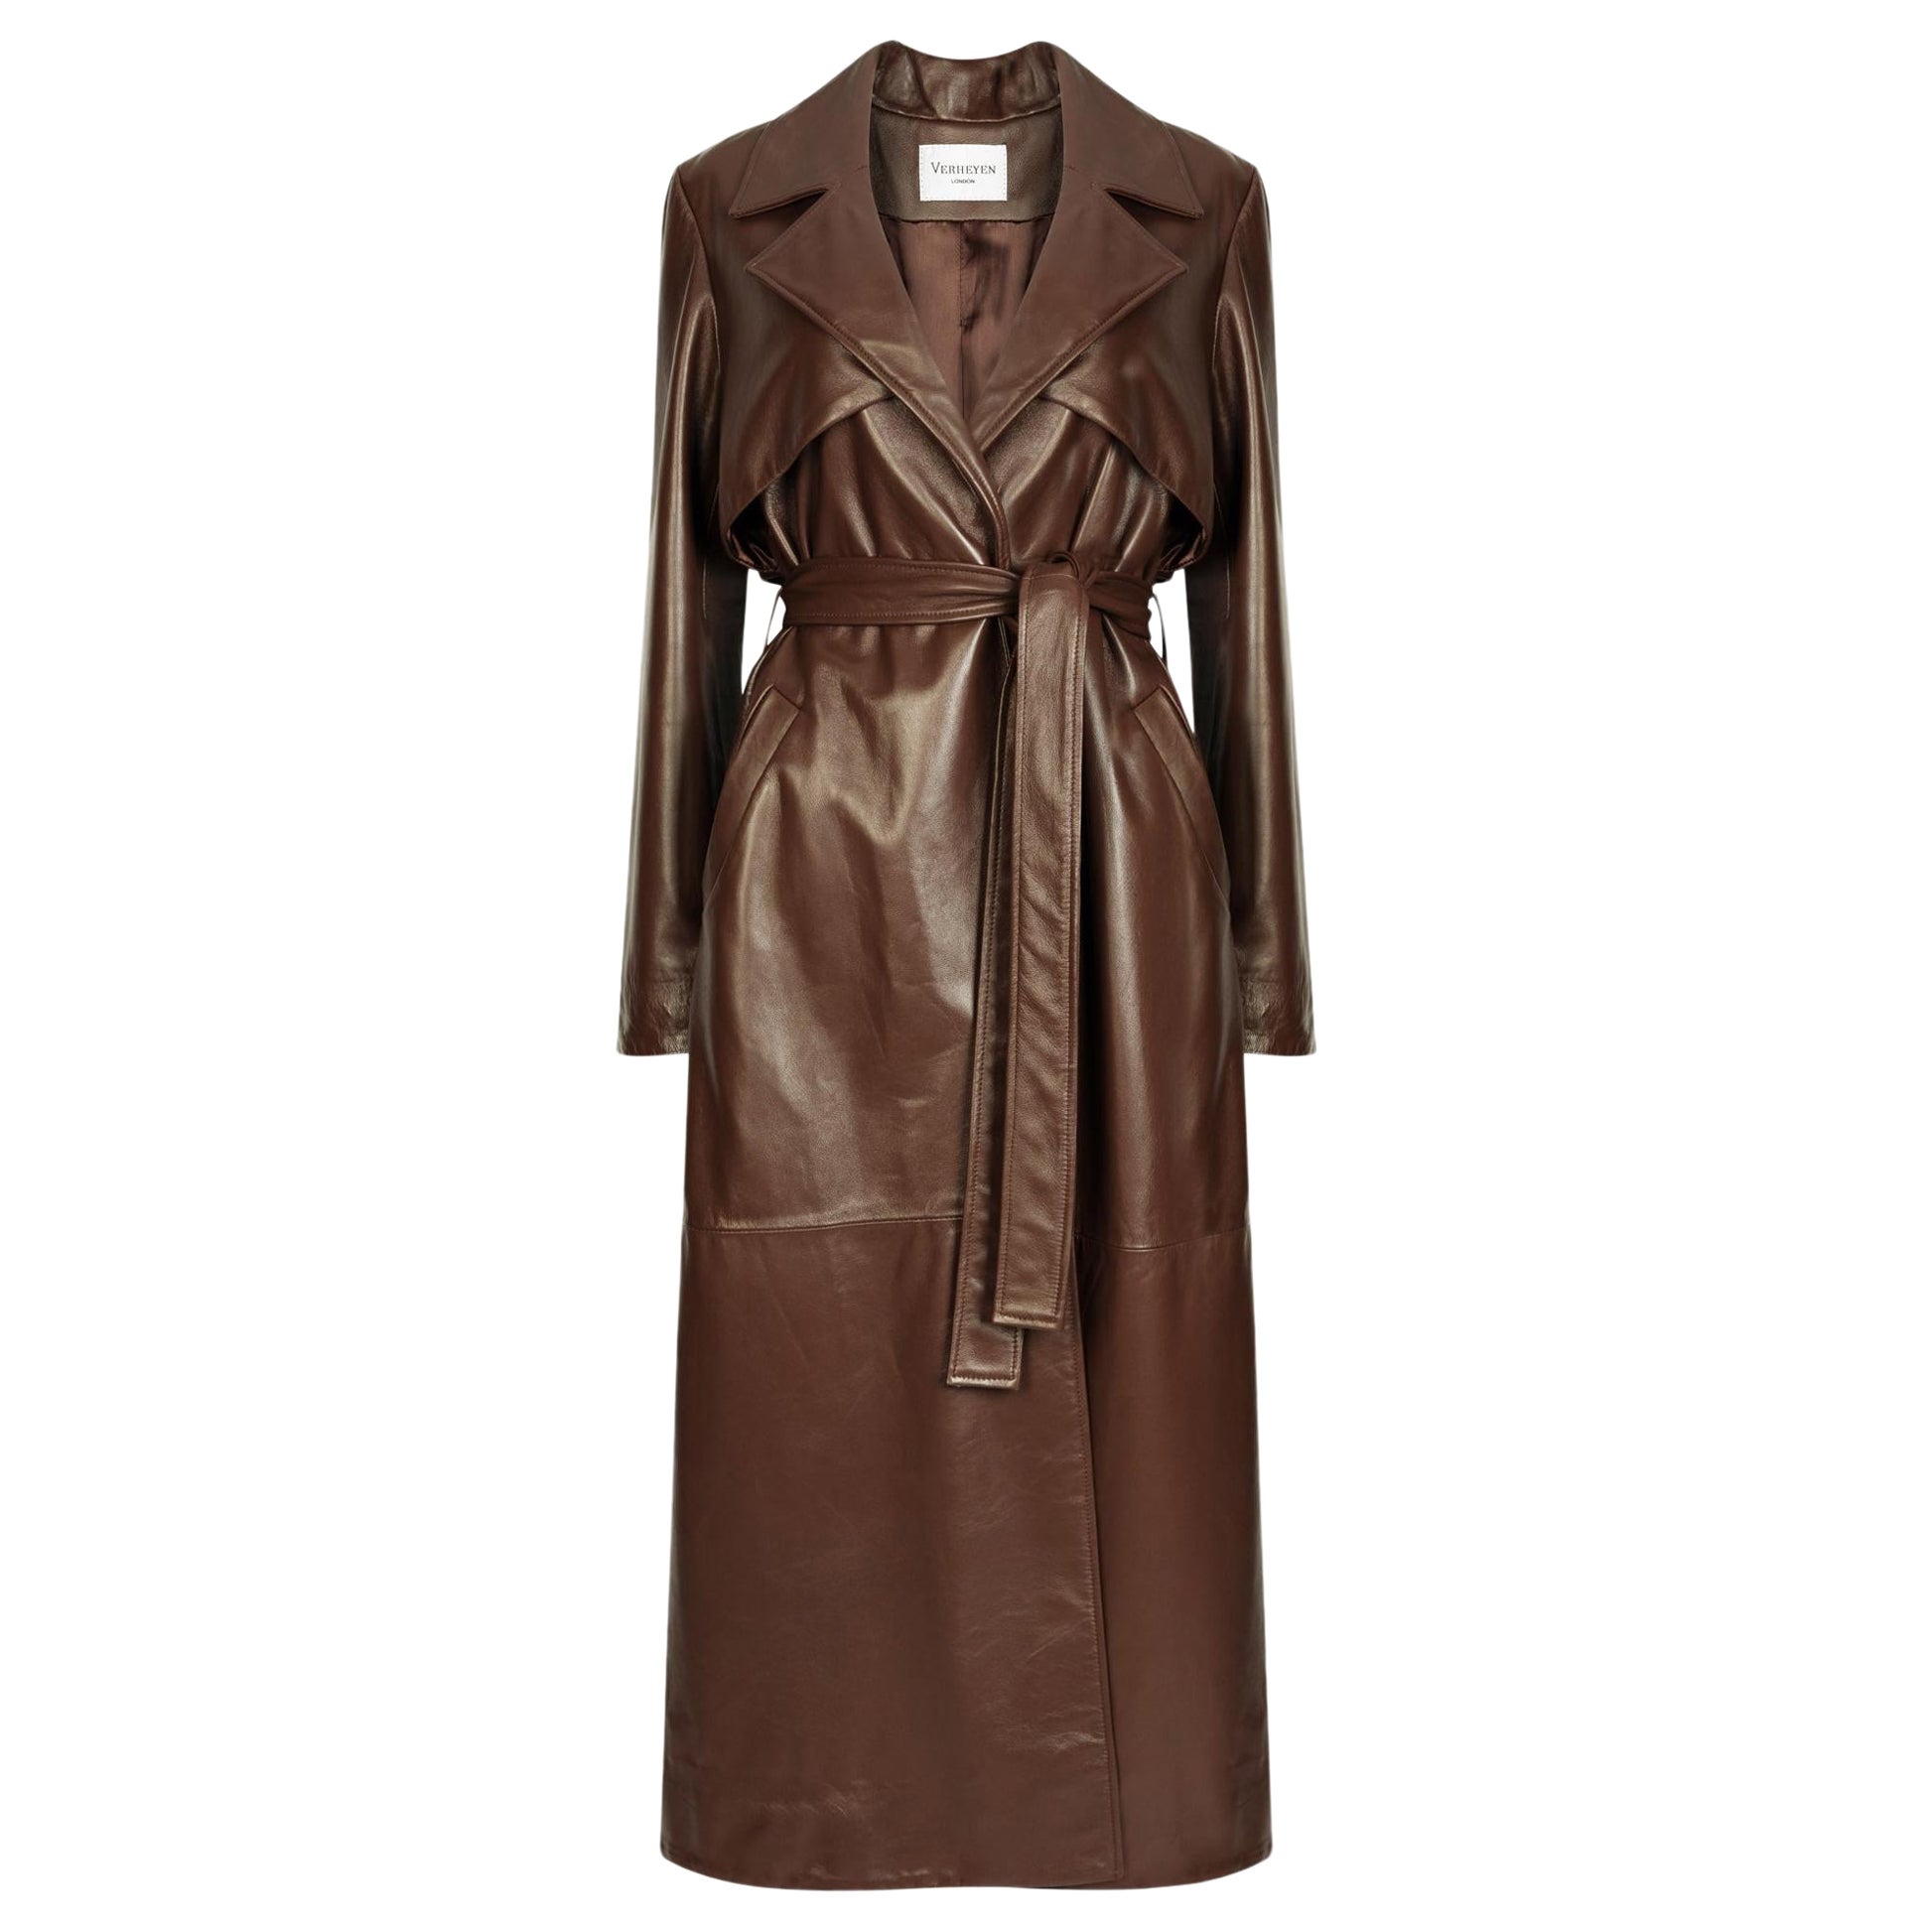 Verheyen London Leather Trench Coat in Chocolate Brown - Size uk 8 For Sale